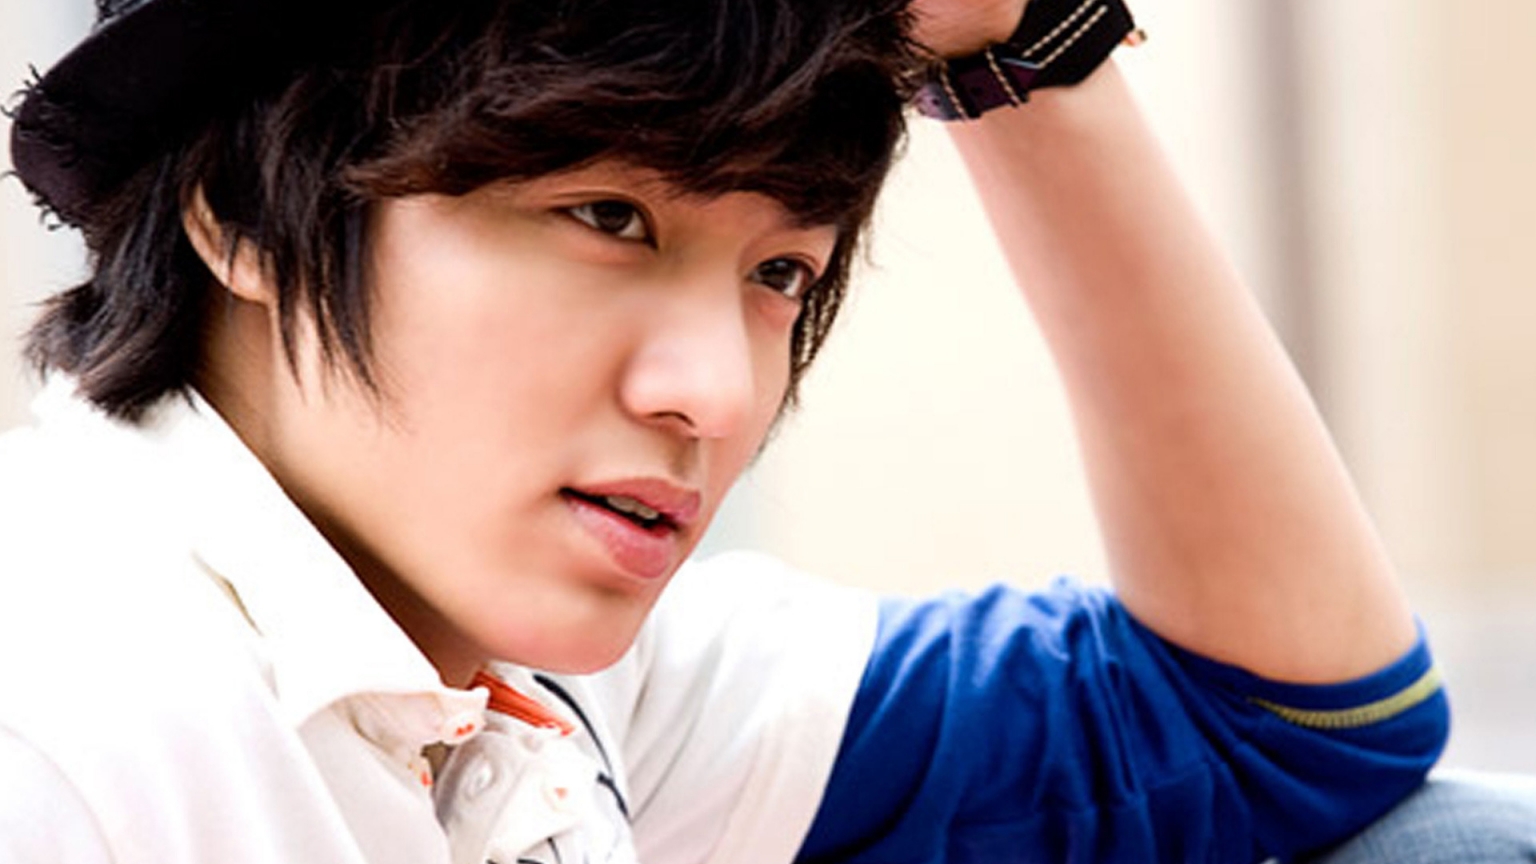 Lee Min Ho Profile Look for 1536 x 864 HDTV resolution